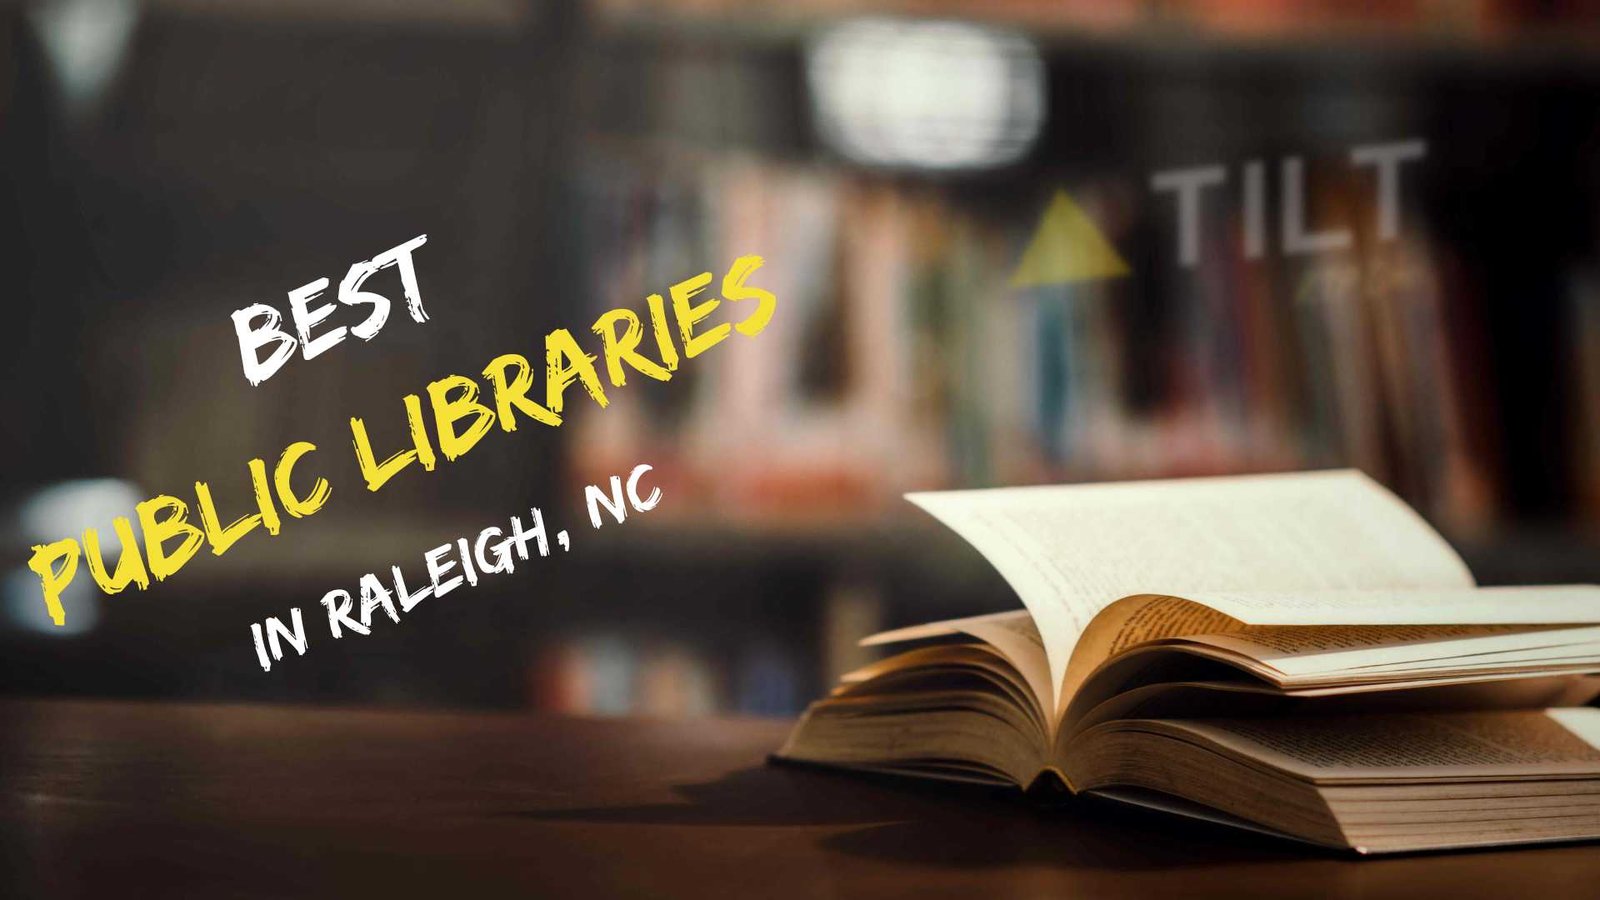 Best-Public-Libraries-In-Raleigh-NC